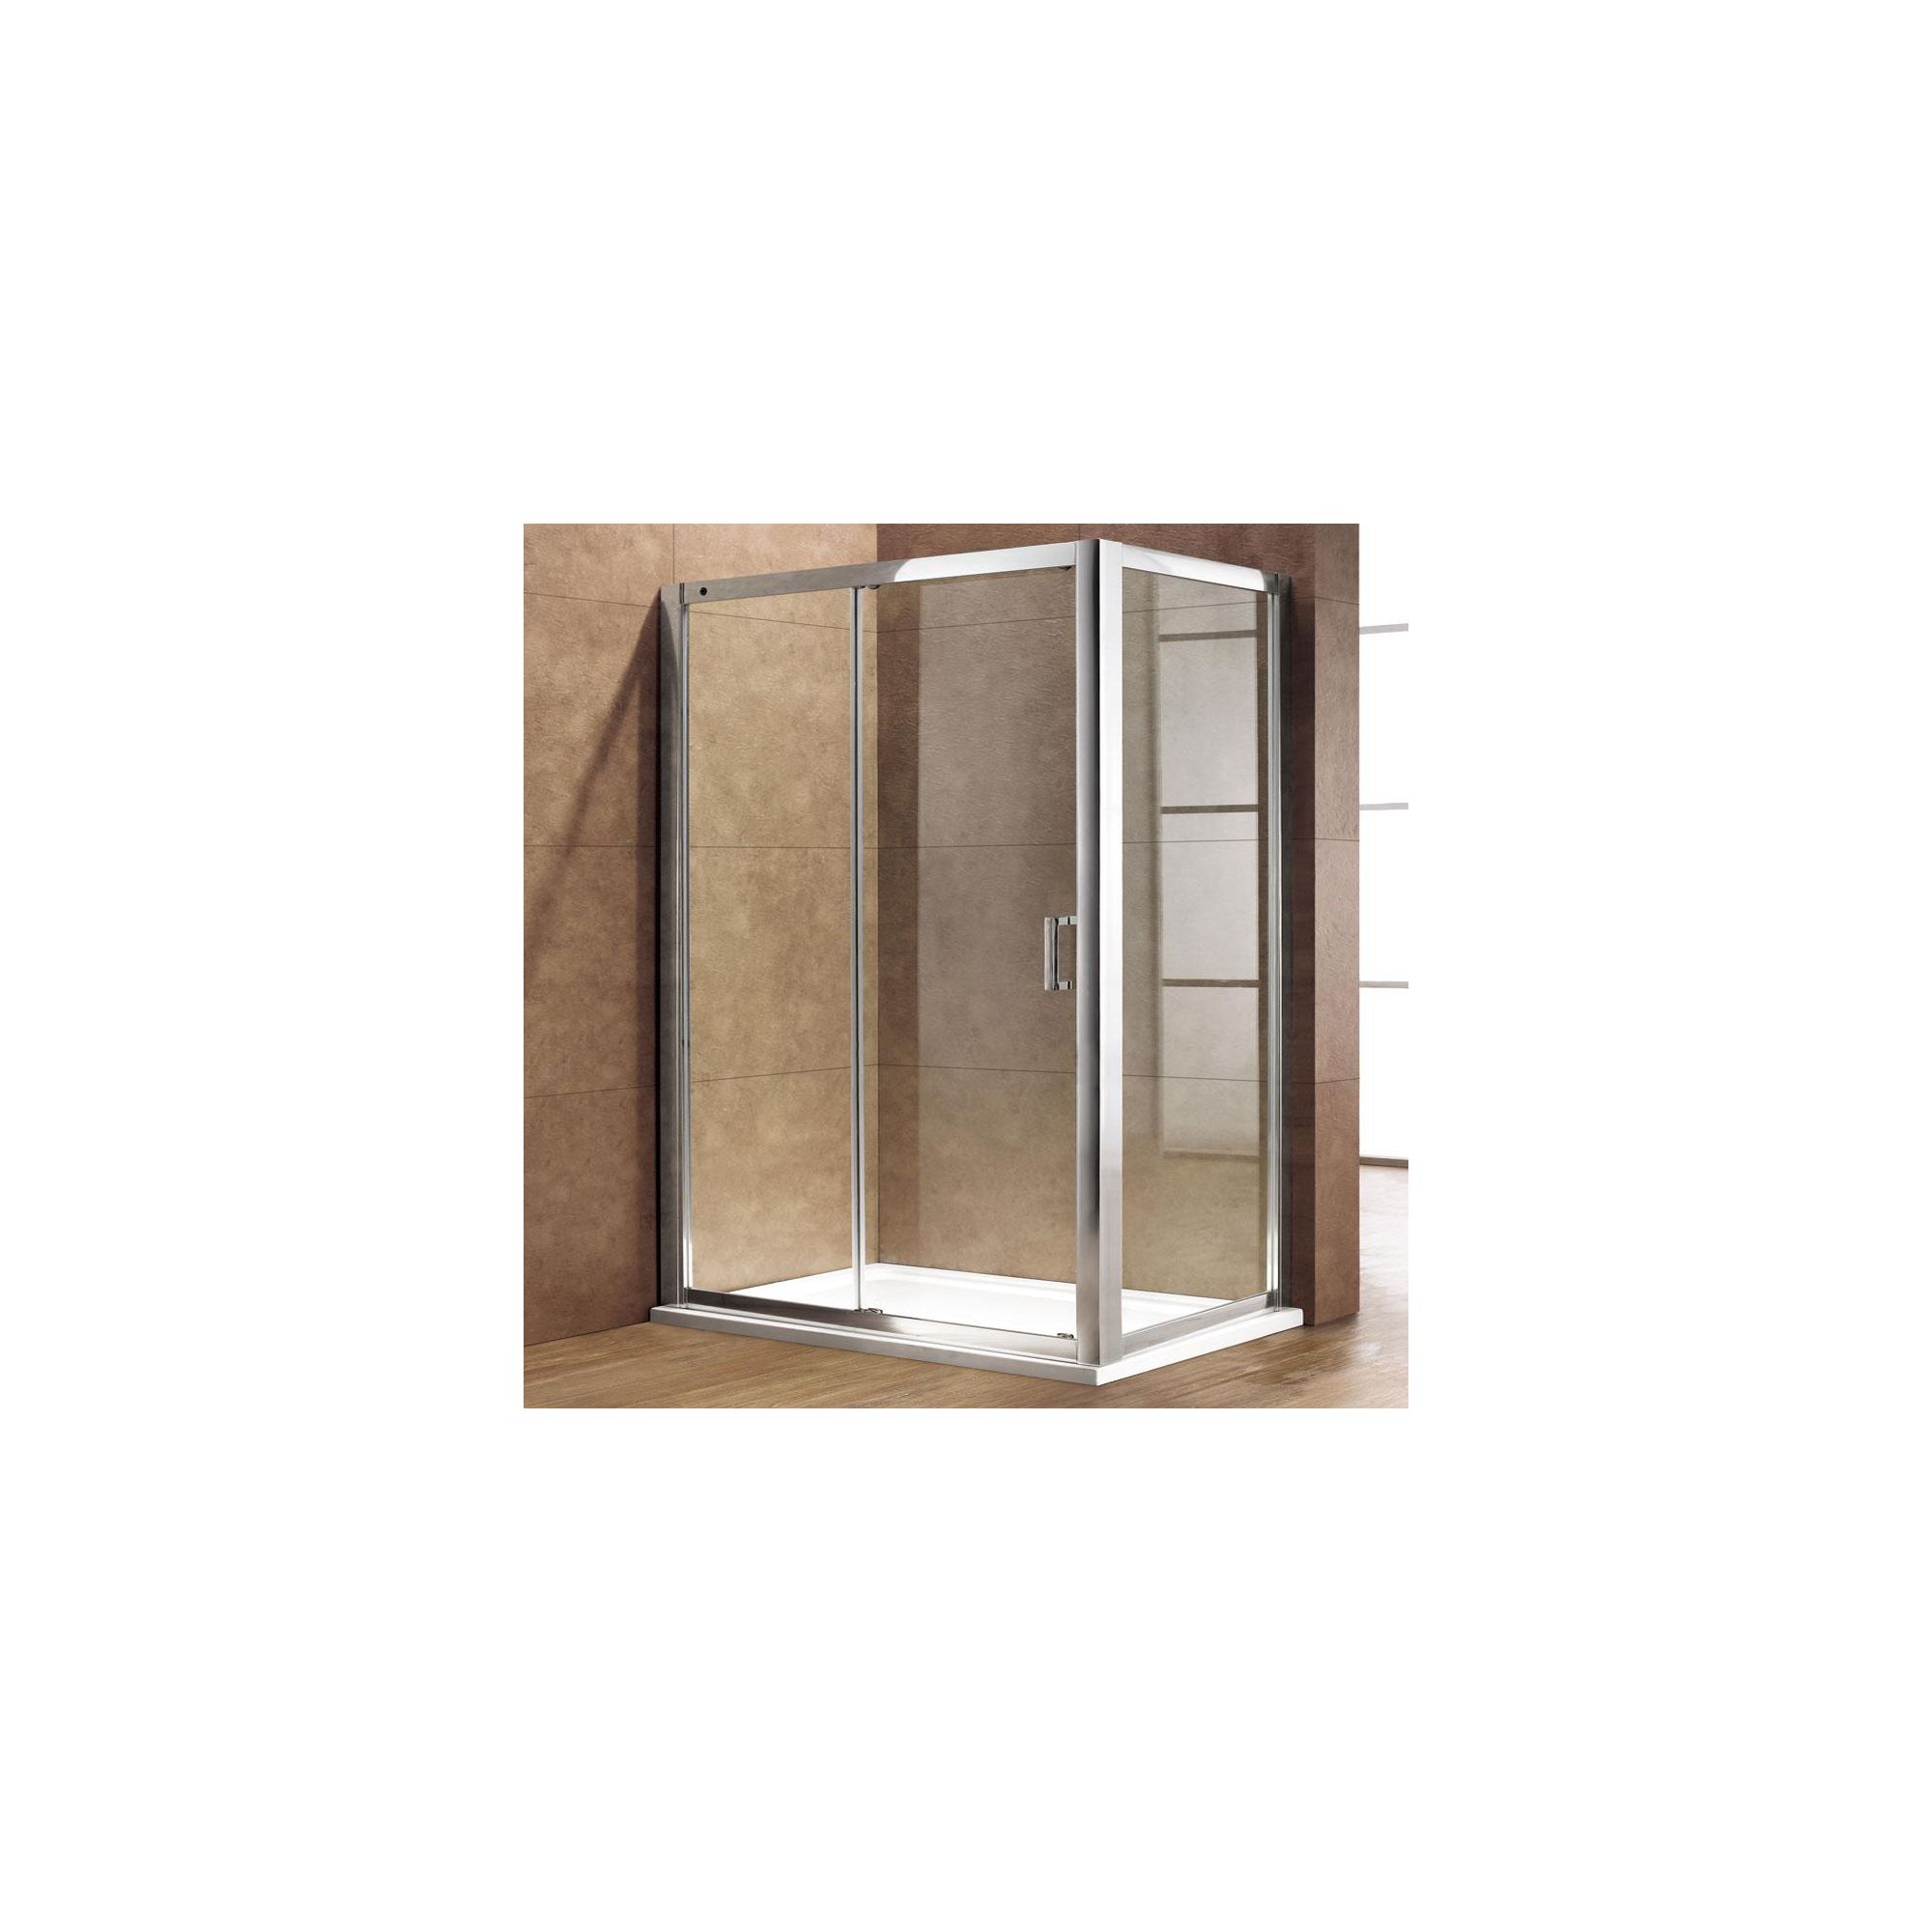 Duchy Premium Single Sliding Door Shower Enclosure, 1000mm x 700mm, 8mm Glass, Low Profile Tray at Tesco Direct